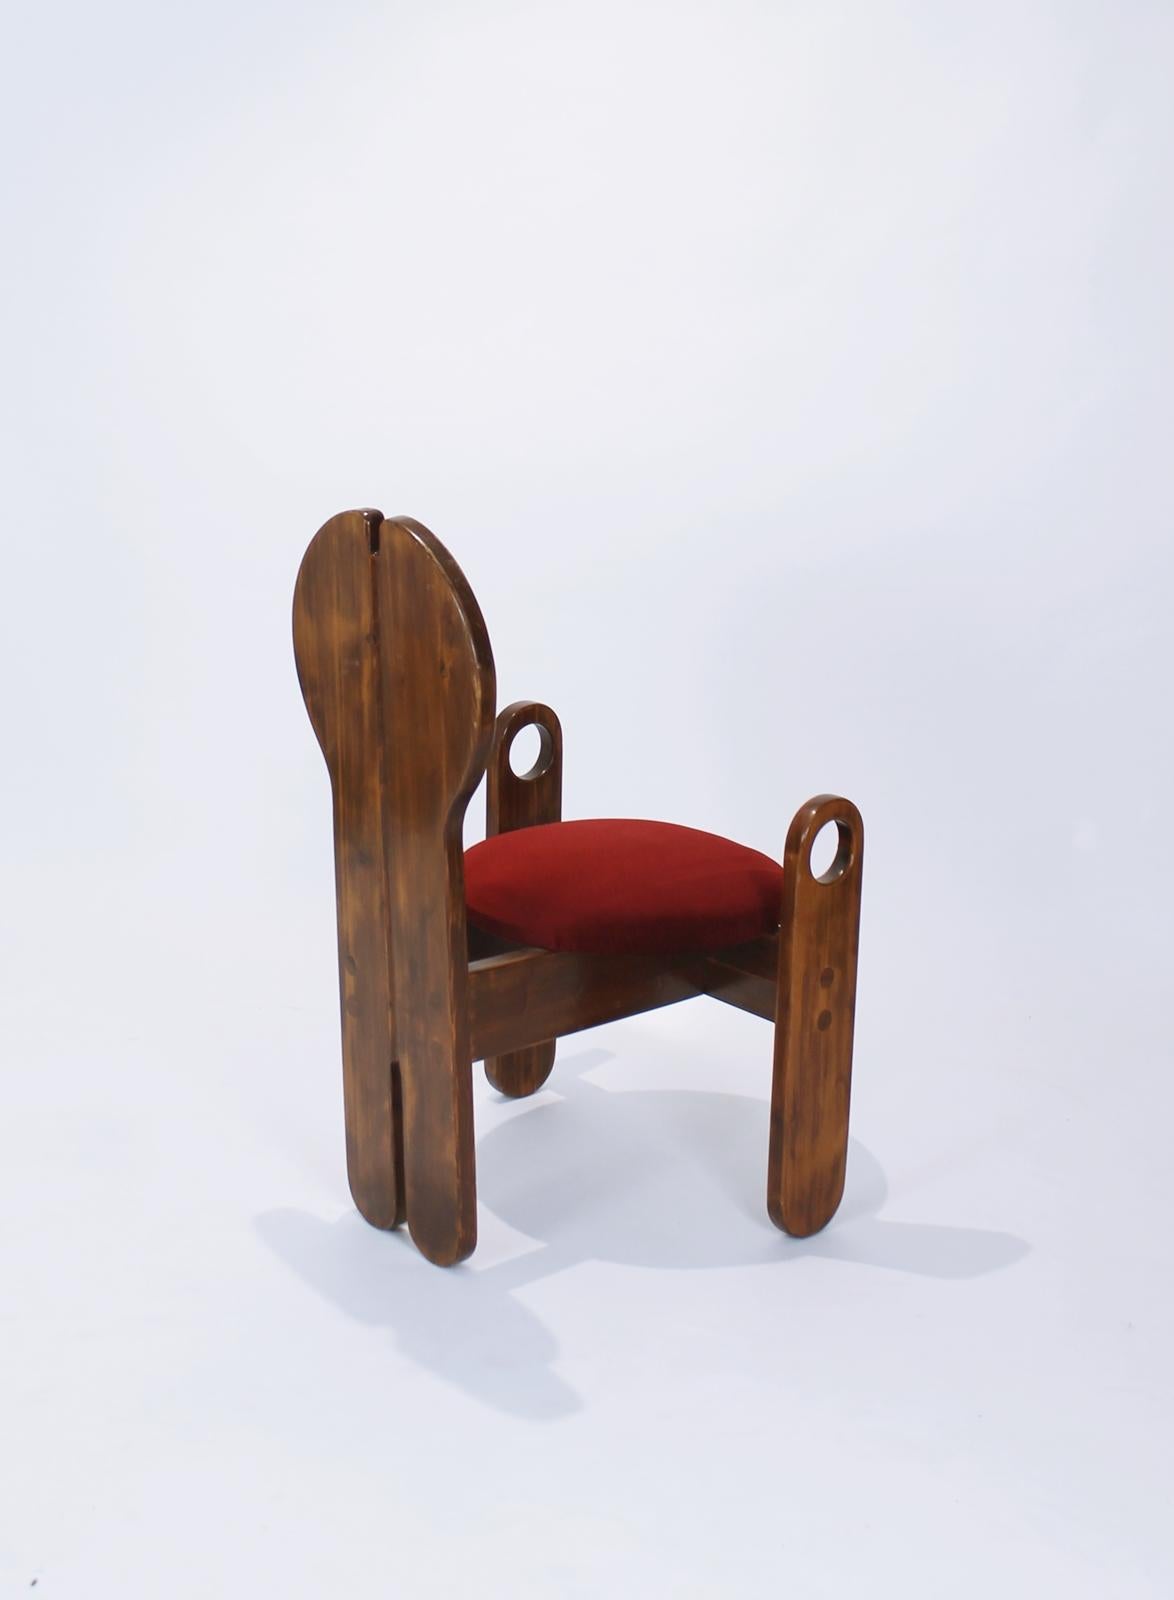 Hand-Crafted Handcrafted Studio Armchair by Szedleczky Design, Hungary, 1970s For Sale